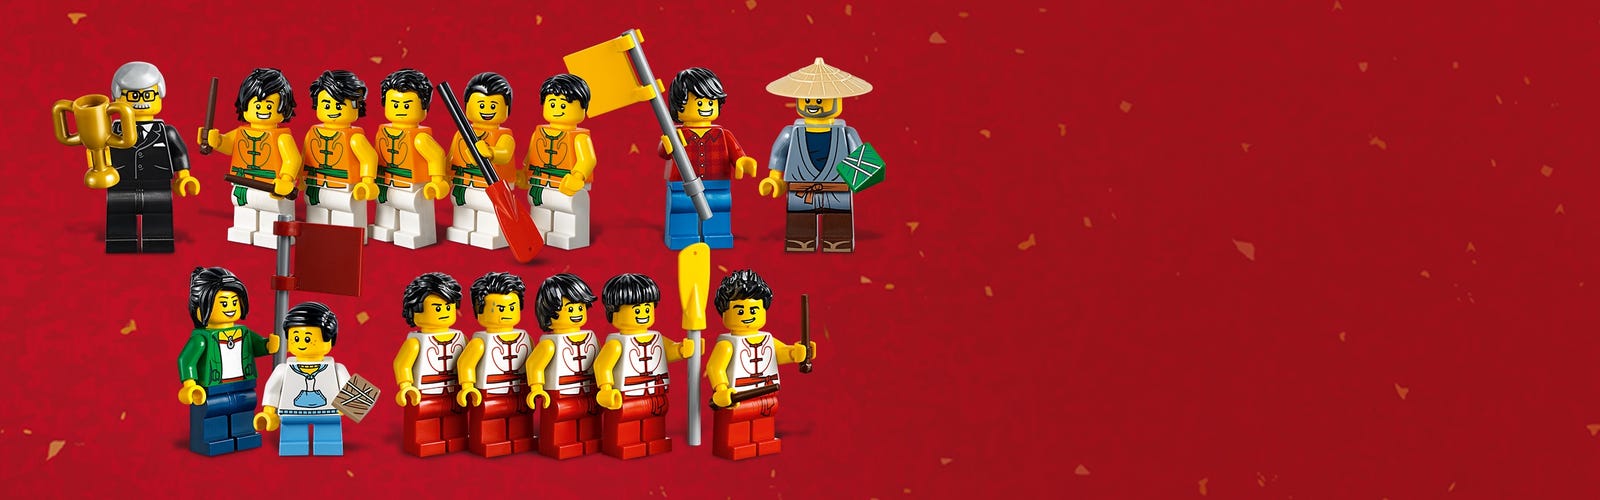 LEGO Set 80103-1 Dragon Boat Race (2019 Chinese Traditional